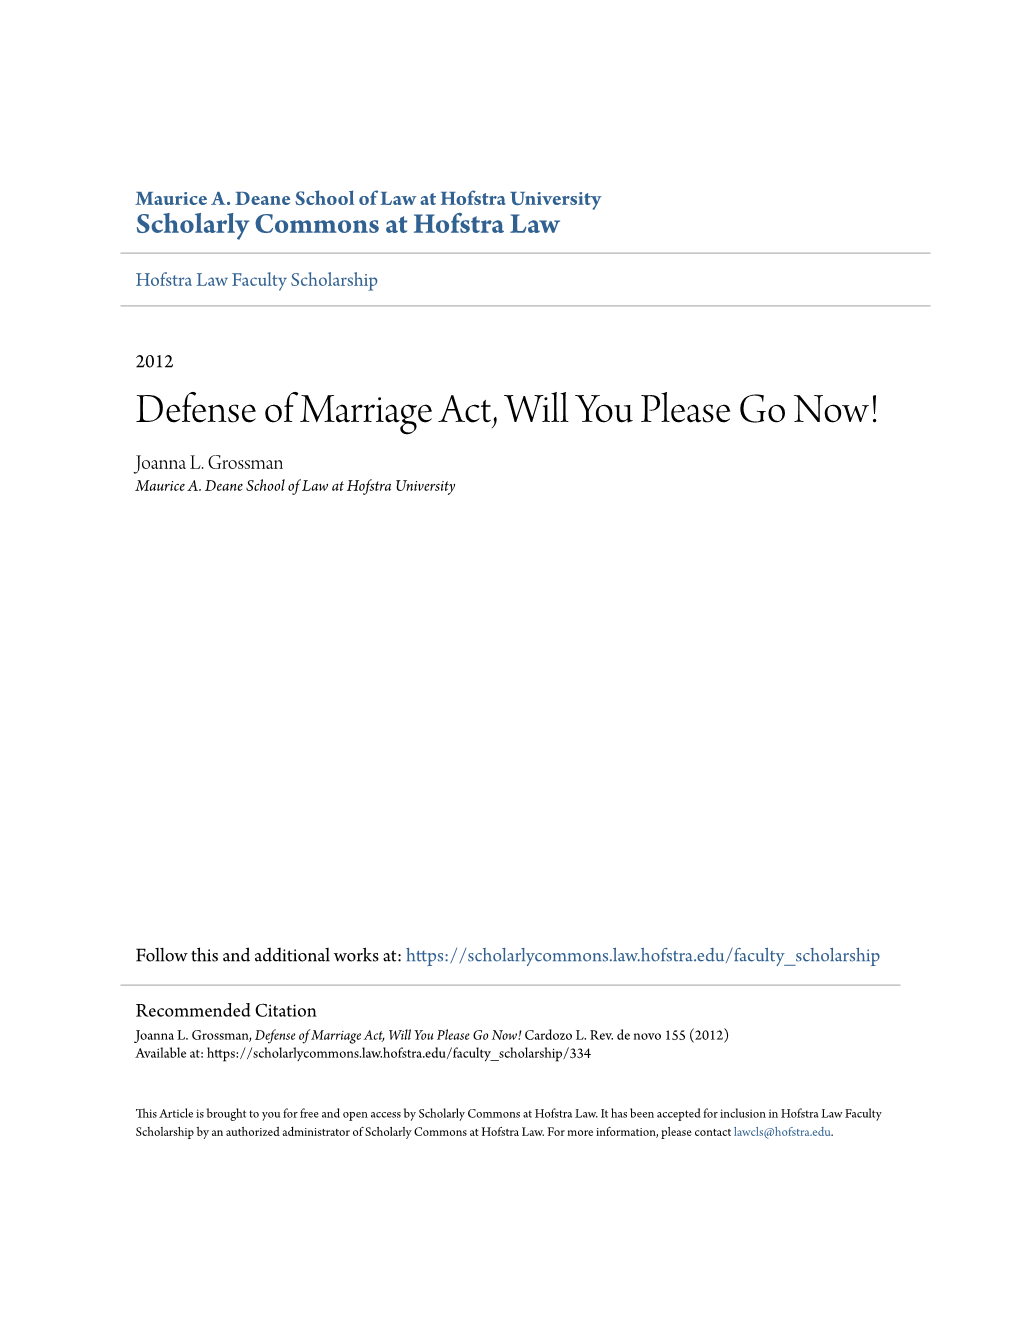 Defense of Marriage Act, Will You Please Go Now! Joanna L